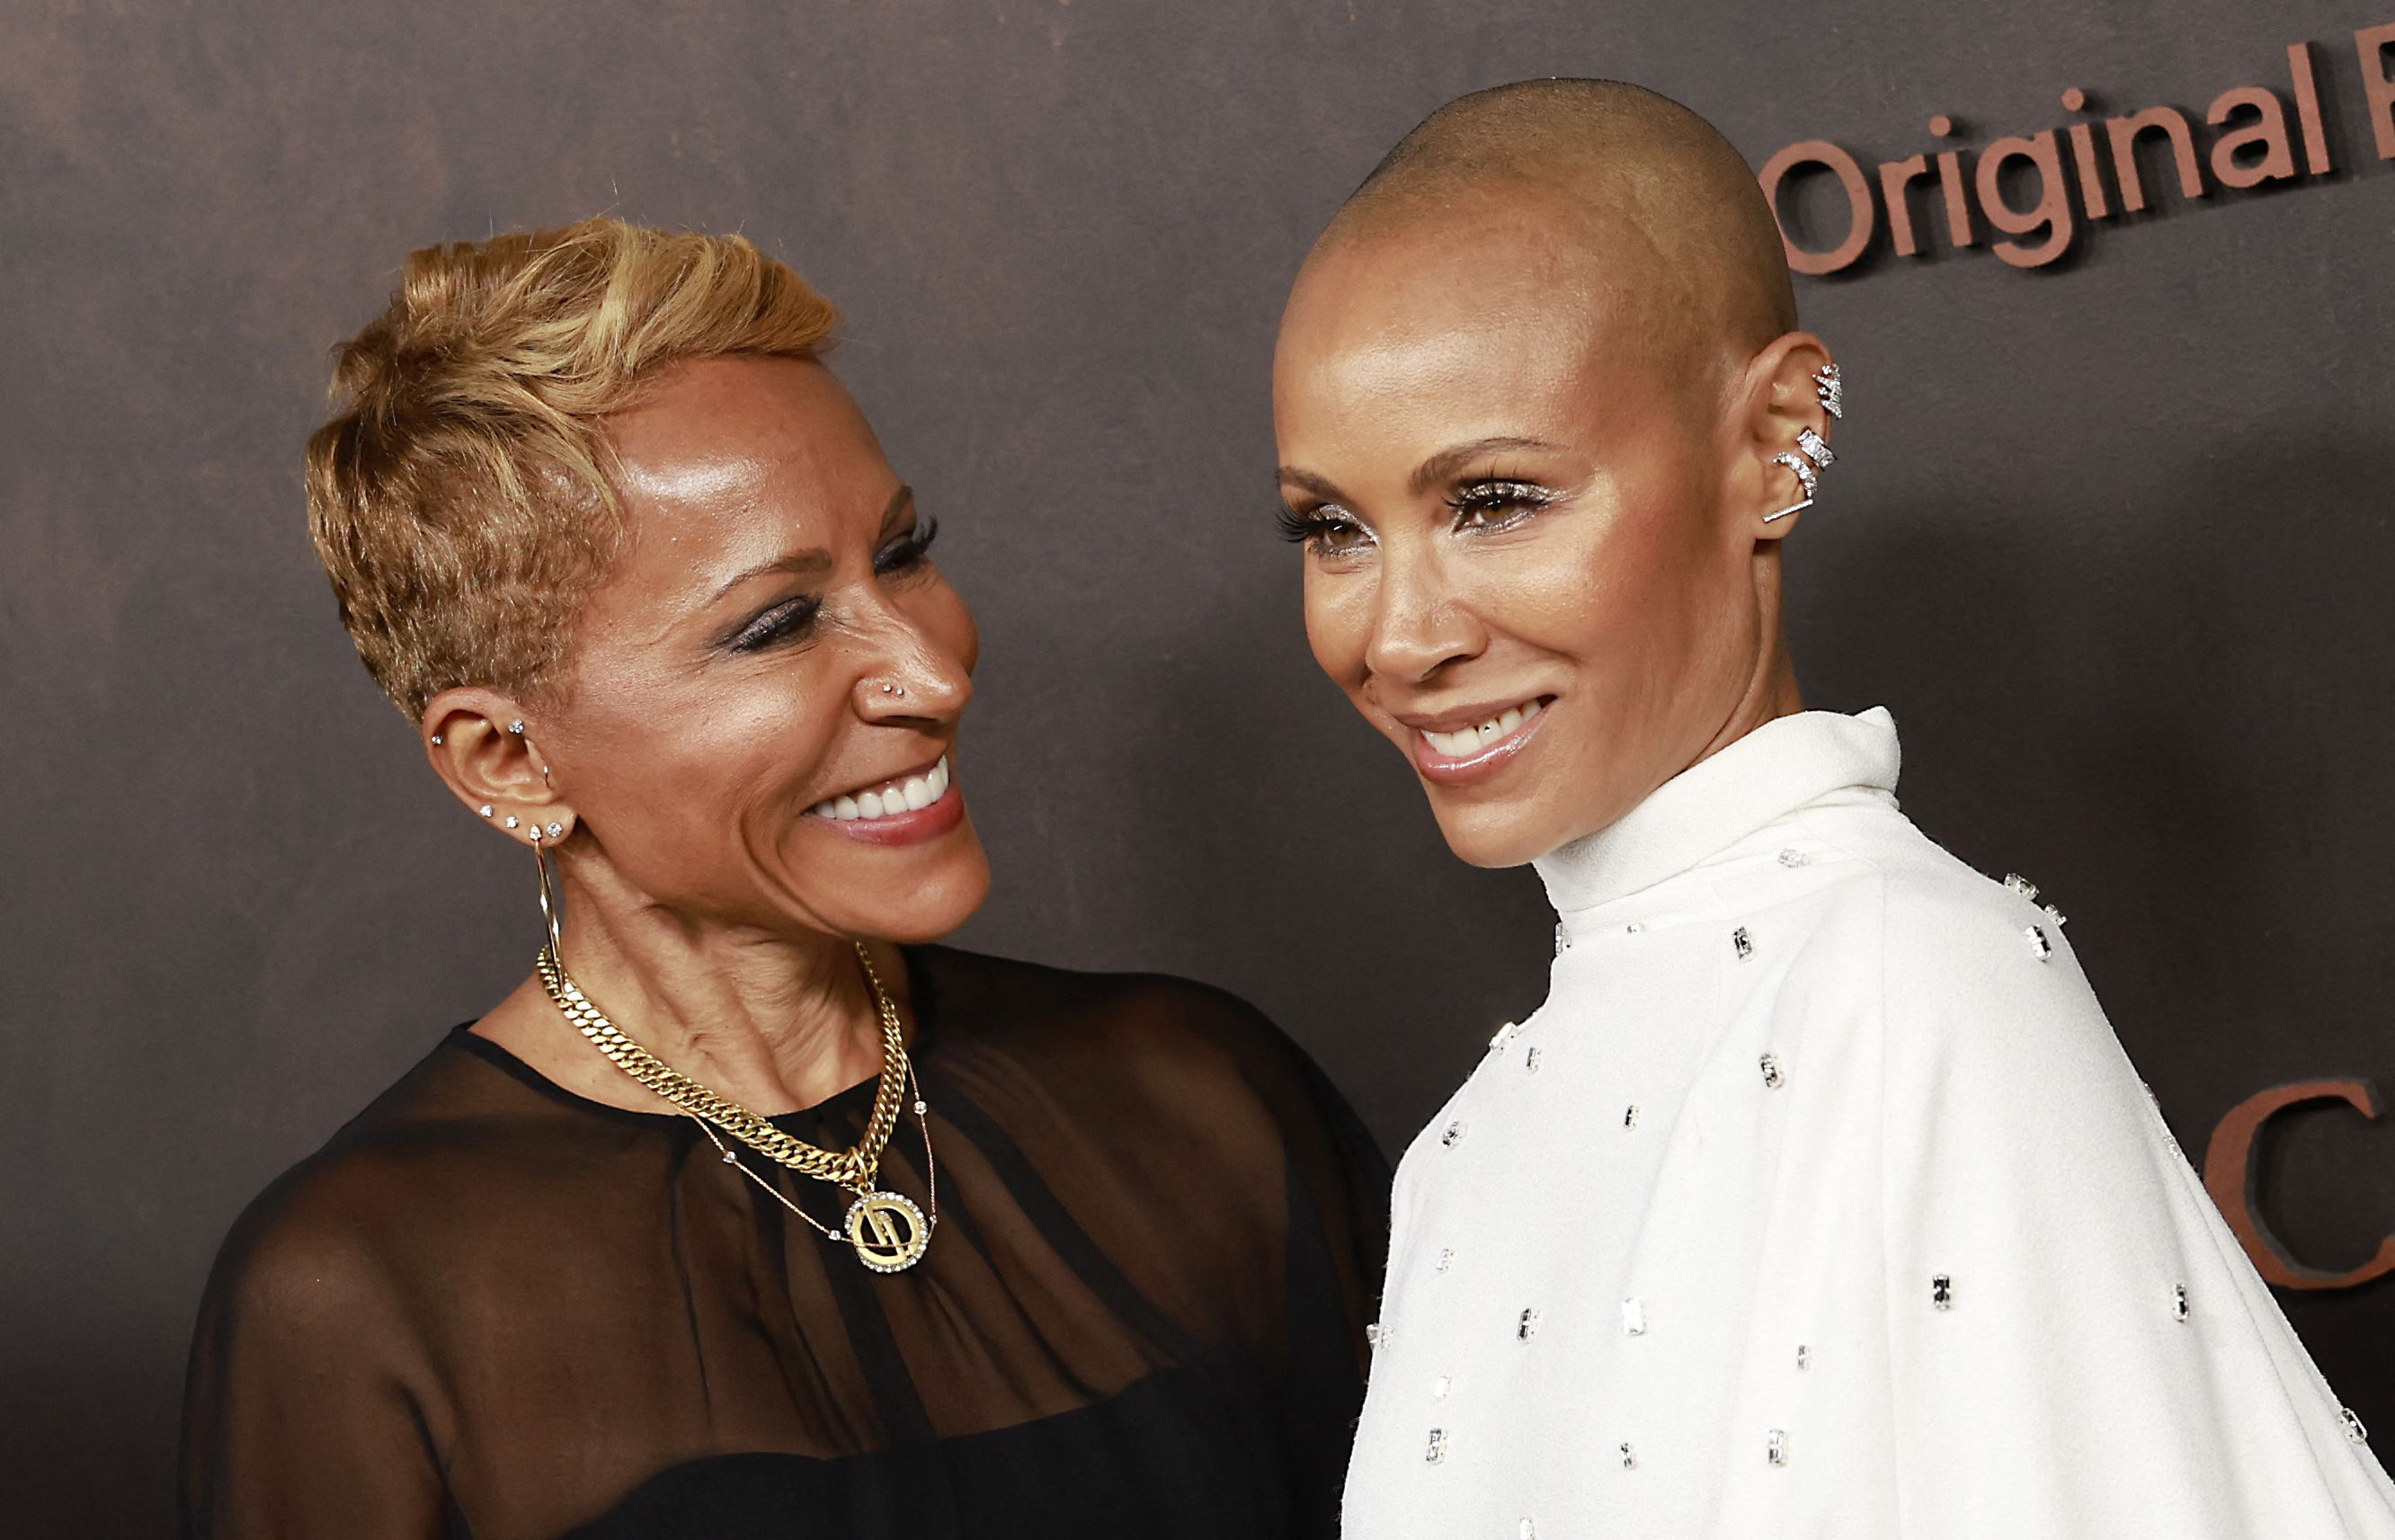 Jada Pinkett Smith news & latest pictures from